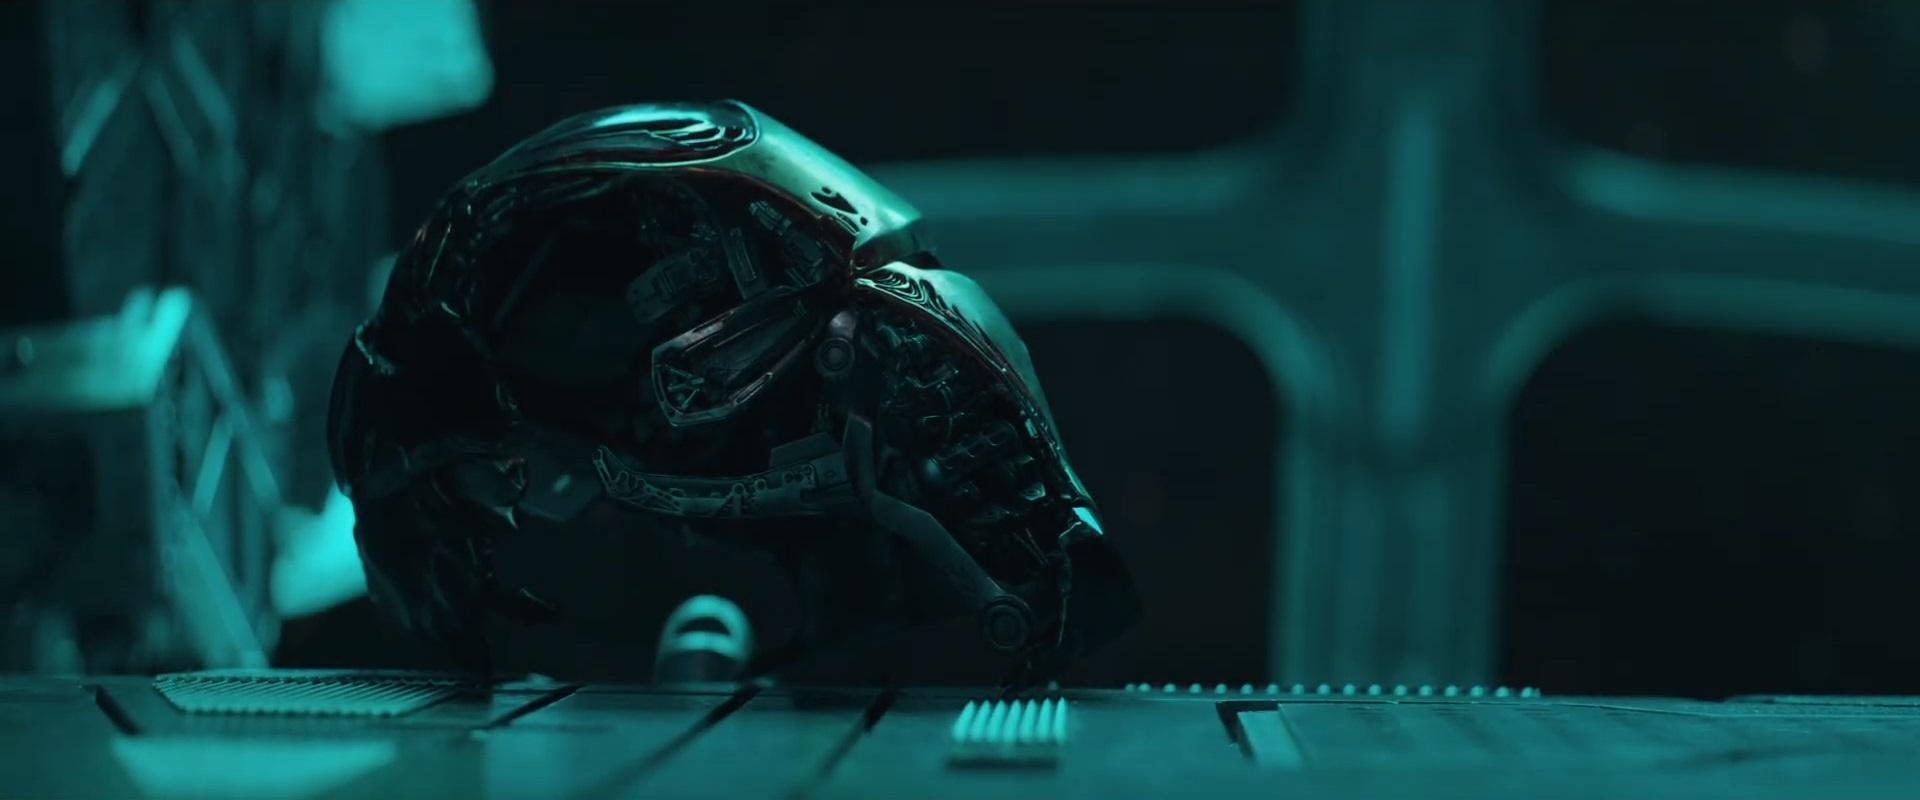 AVENGERS: ENDGAME Out Over 40 Hi Res Screengrabs From